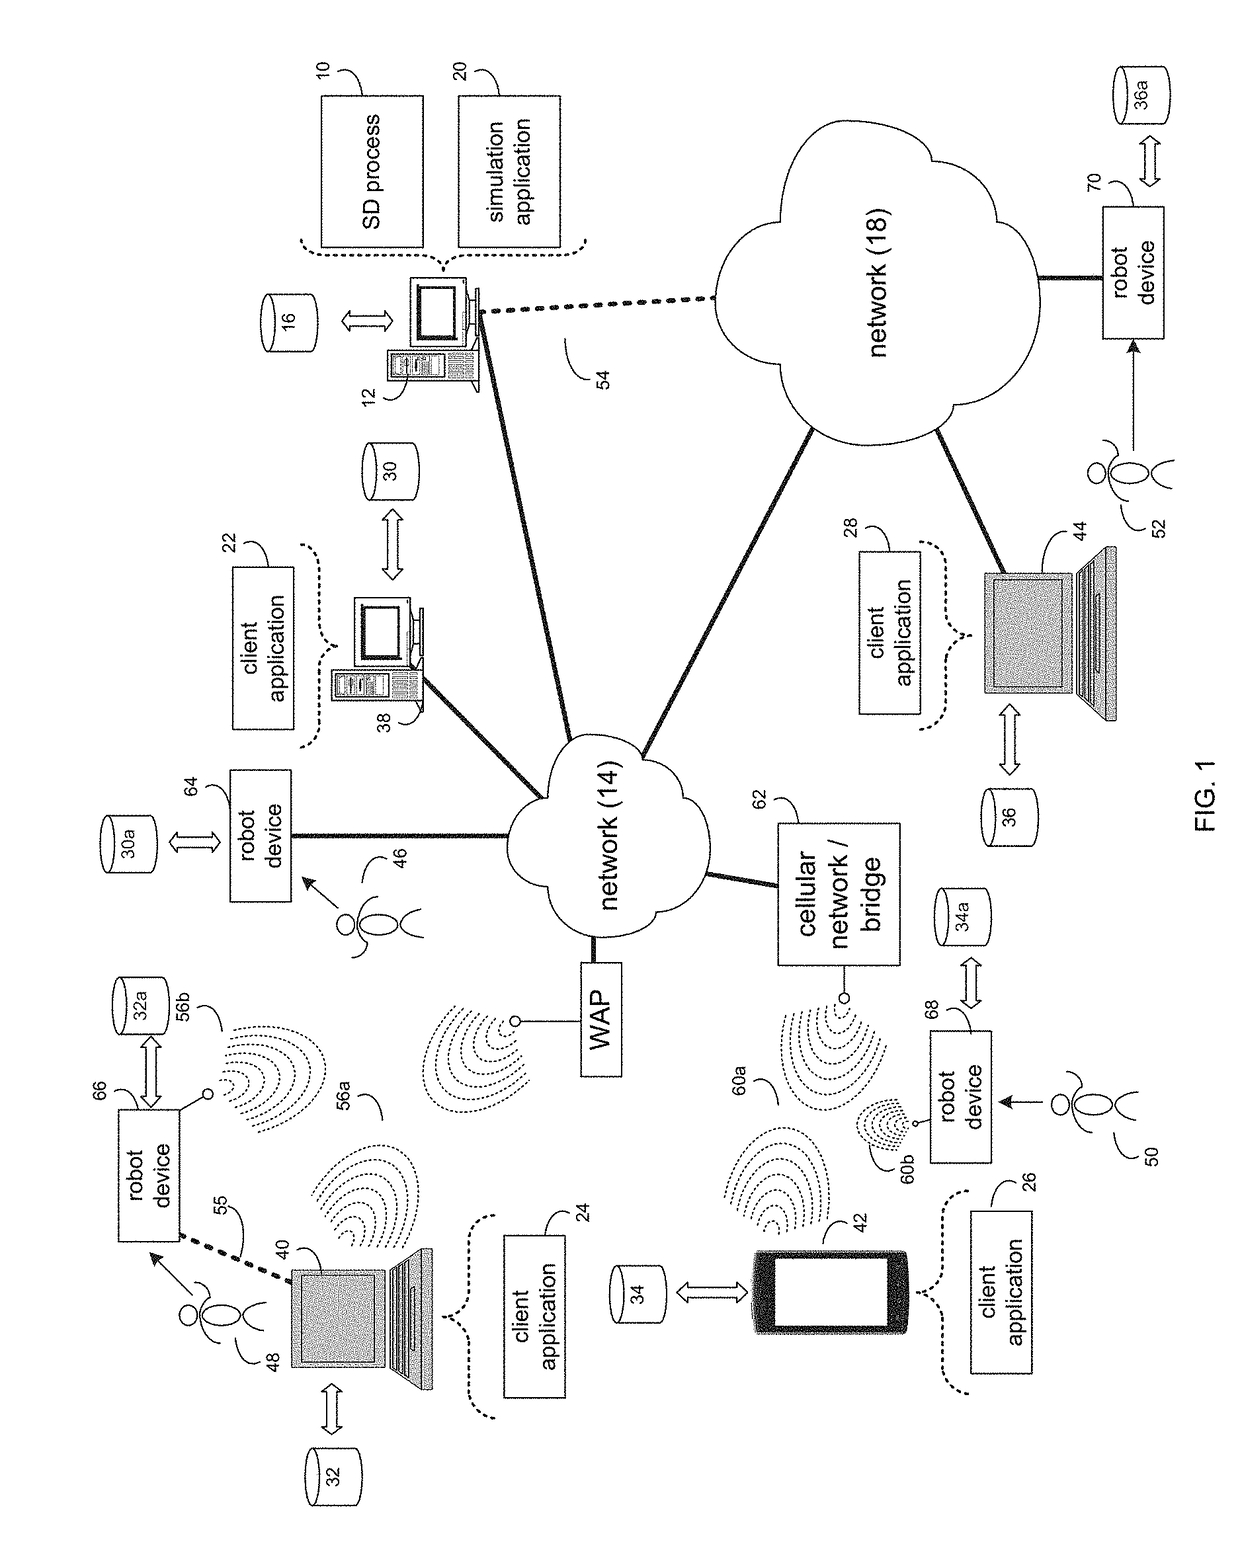 System and method for game theory-based design of robotic systems